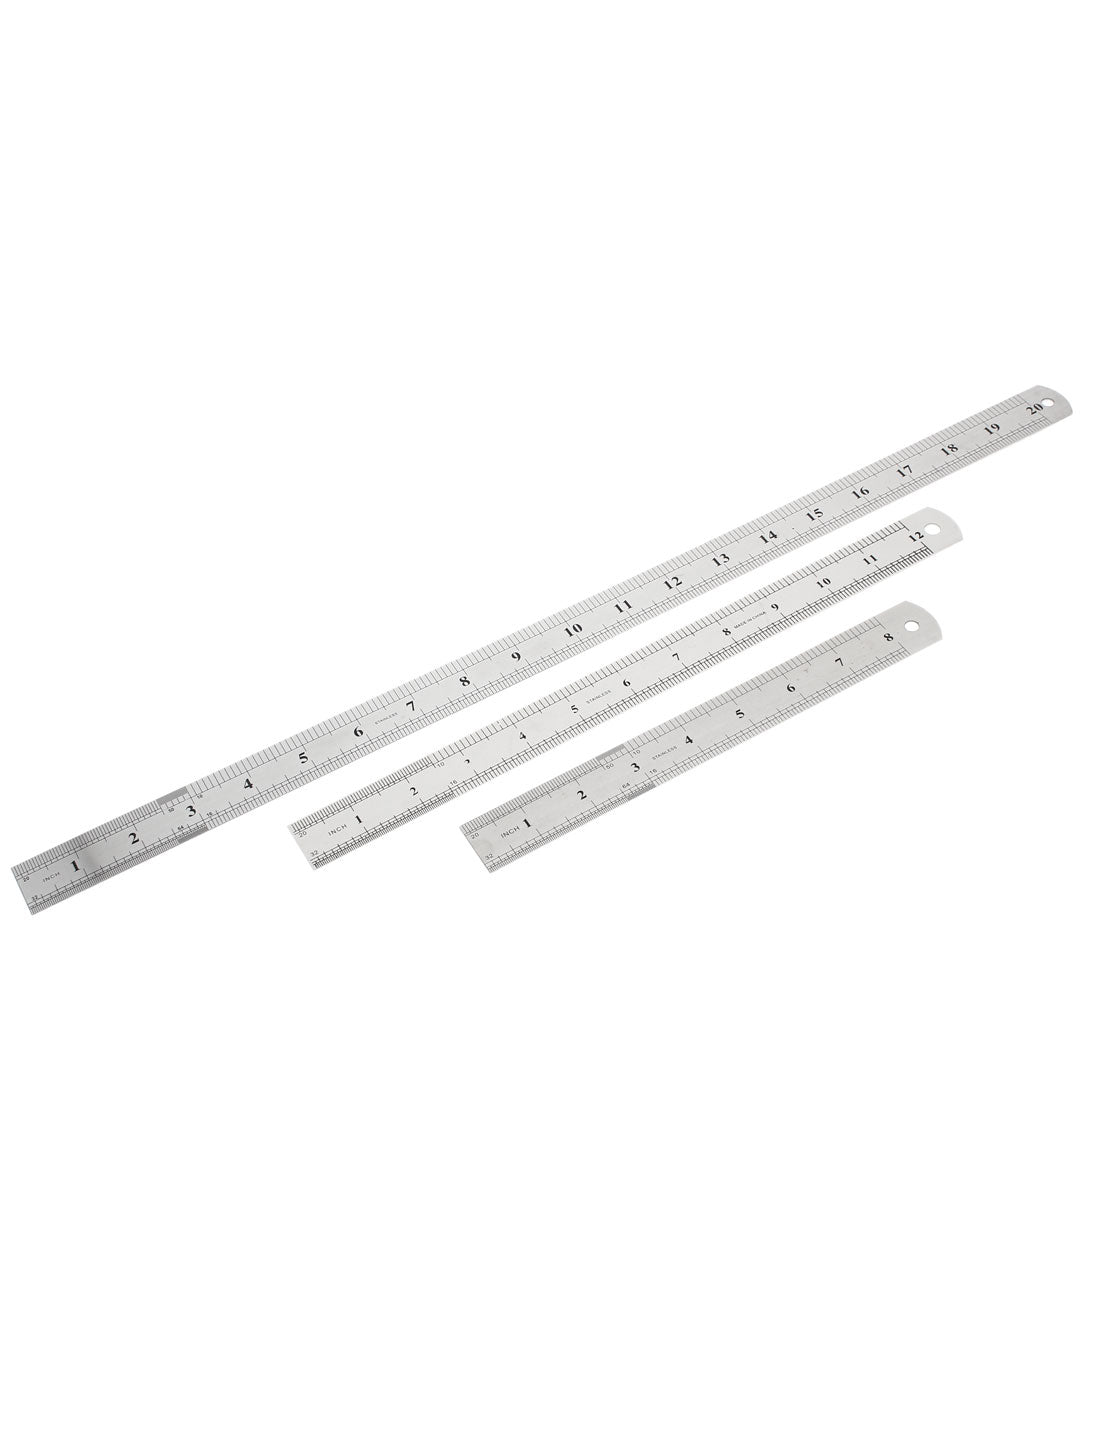 uxcell Uxcell 3 in 1 20cm 30cm 50cm Measure Range Double Side     Stationery Metric Scale Straight Ruler Silver Tone